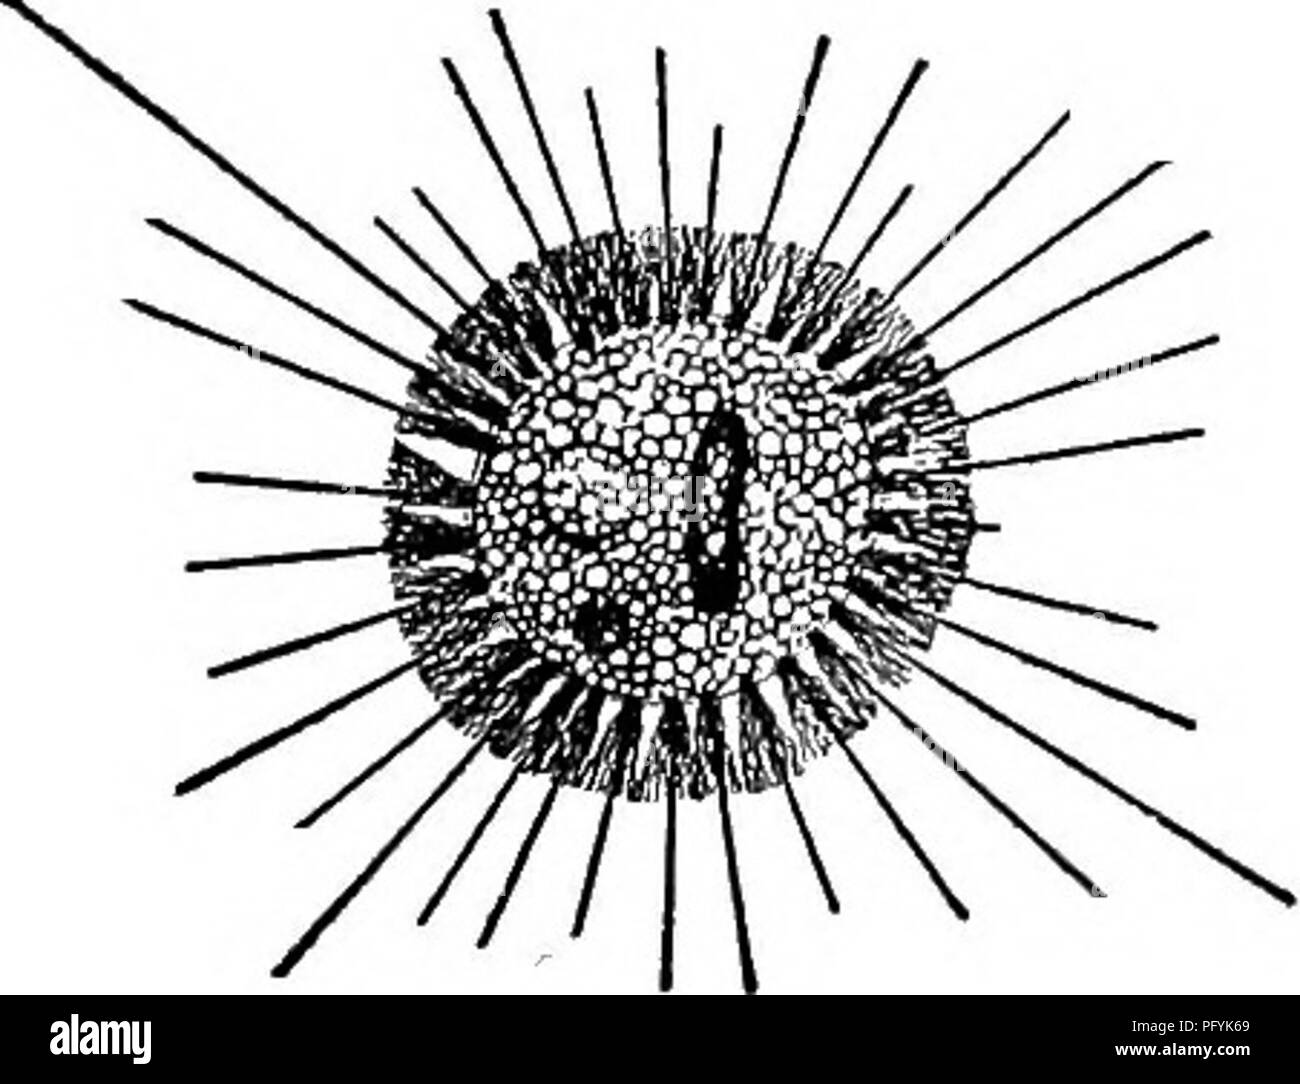 . Fresh-water biology. Freshwater biology. CDLIATE PROTOZOA (INFUSORIA.) 271 INFUSORIA I (208) Cilia present during all stages of existence. . Class Ciliata . 2 2(127) Body usually uniformly covered with cUia 3 3 (104) Cilia similar or slightly lengthened about the mouth; no adoral spiral zone Order Holotricha . 4 4 (59) Without an undulating membrane about the mouth. Mouth closed except when taking food. Suborder Gymnostomina . 5 5 (6) With a shell of numerous plates arranged in zones around the body. Cilia projecting between the plates. Coleps Nitzsch. Representative species. . Coleps hirtus Stock Photo